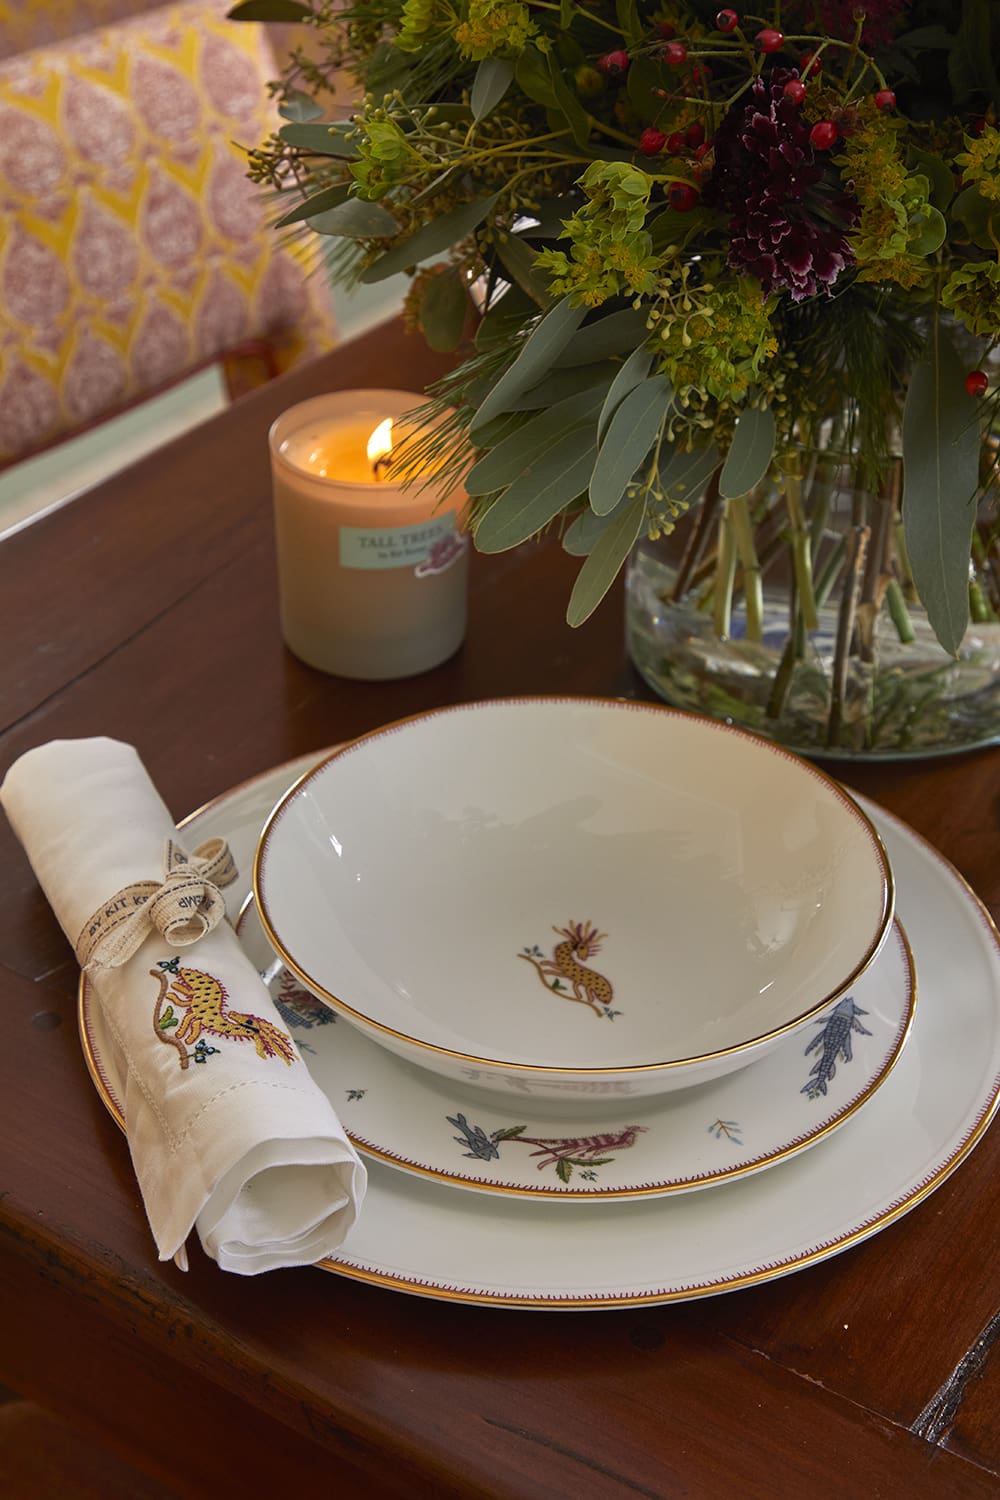 Kit Kemp interiors | a bone china bowl, plate and napkin on a wooden table